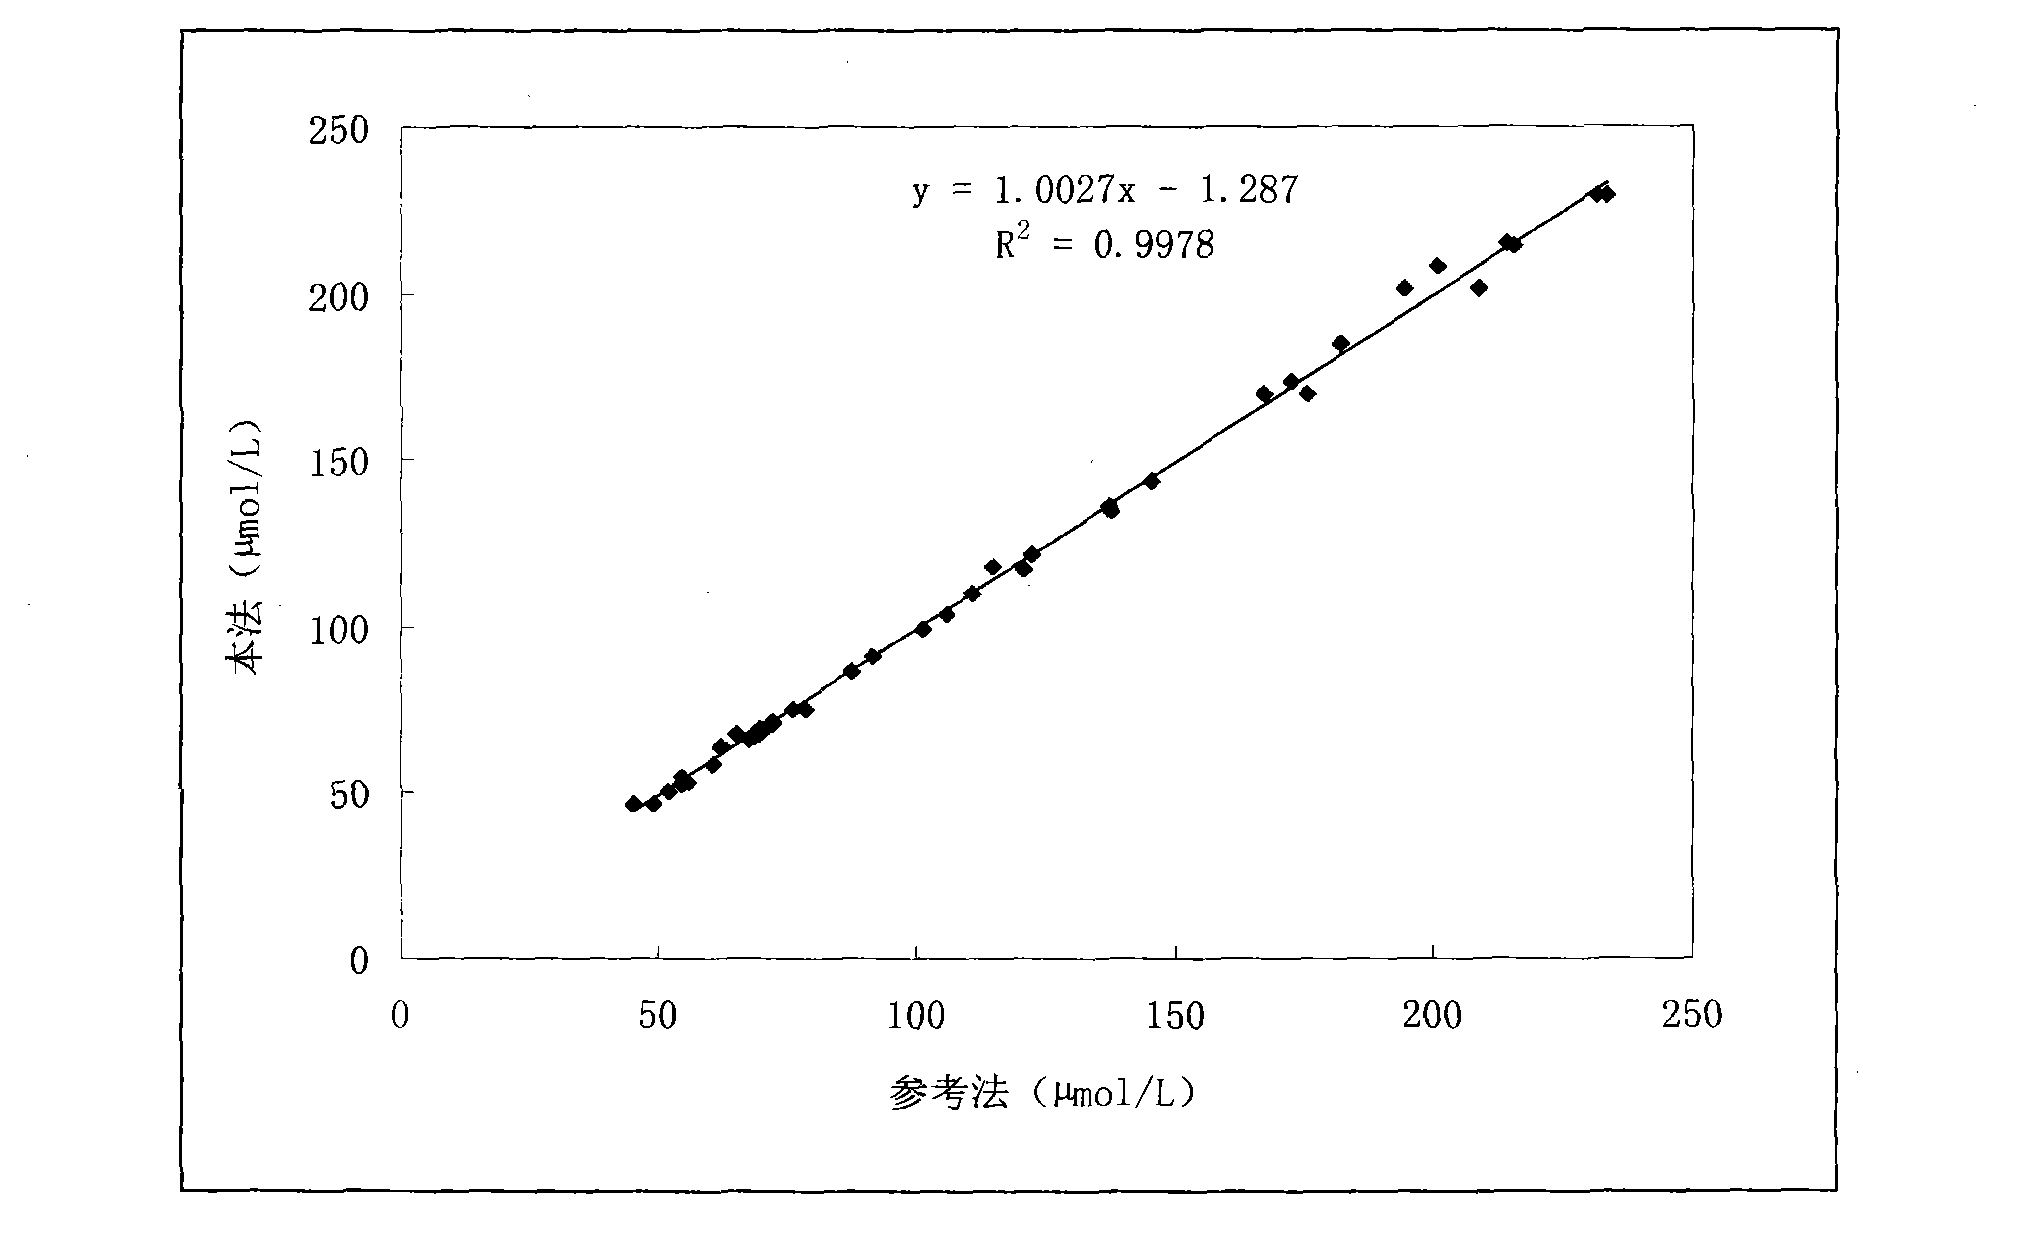 Method for measuring 1,5-anhydroglucitol by oxidase